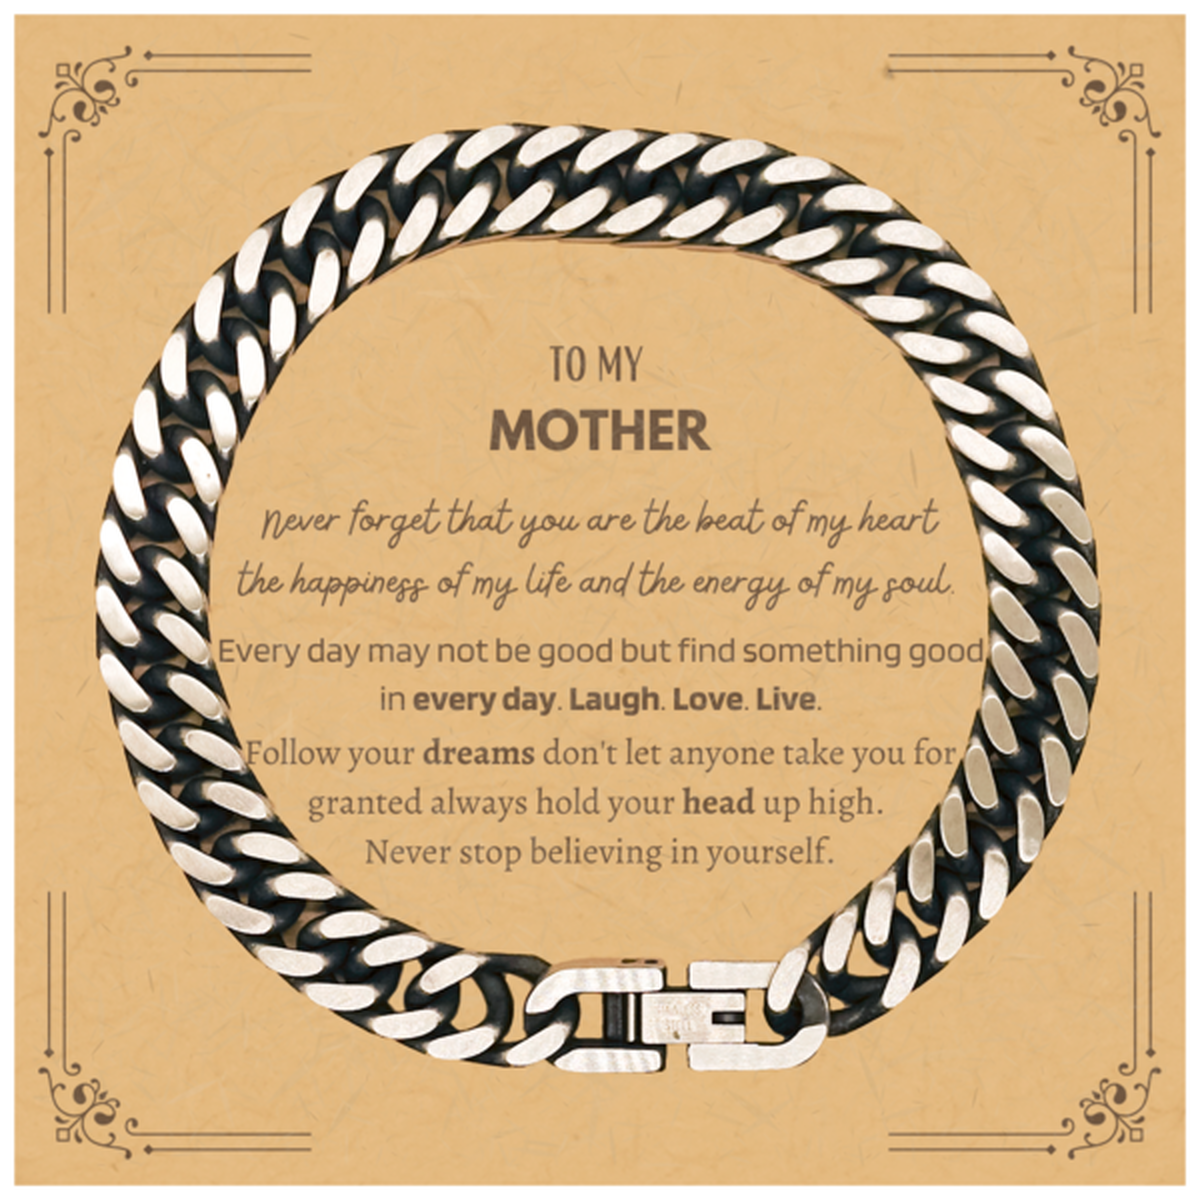 To My Mother Message Card Gifts, Christmas Mother Cuban Link Chain Bracelet Present, Birthday Unique Motivational For Mother, To My Mother Never forget that you are the beat of my heart the happiness of my life and the energy of my soul